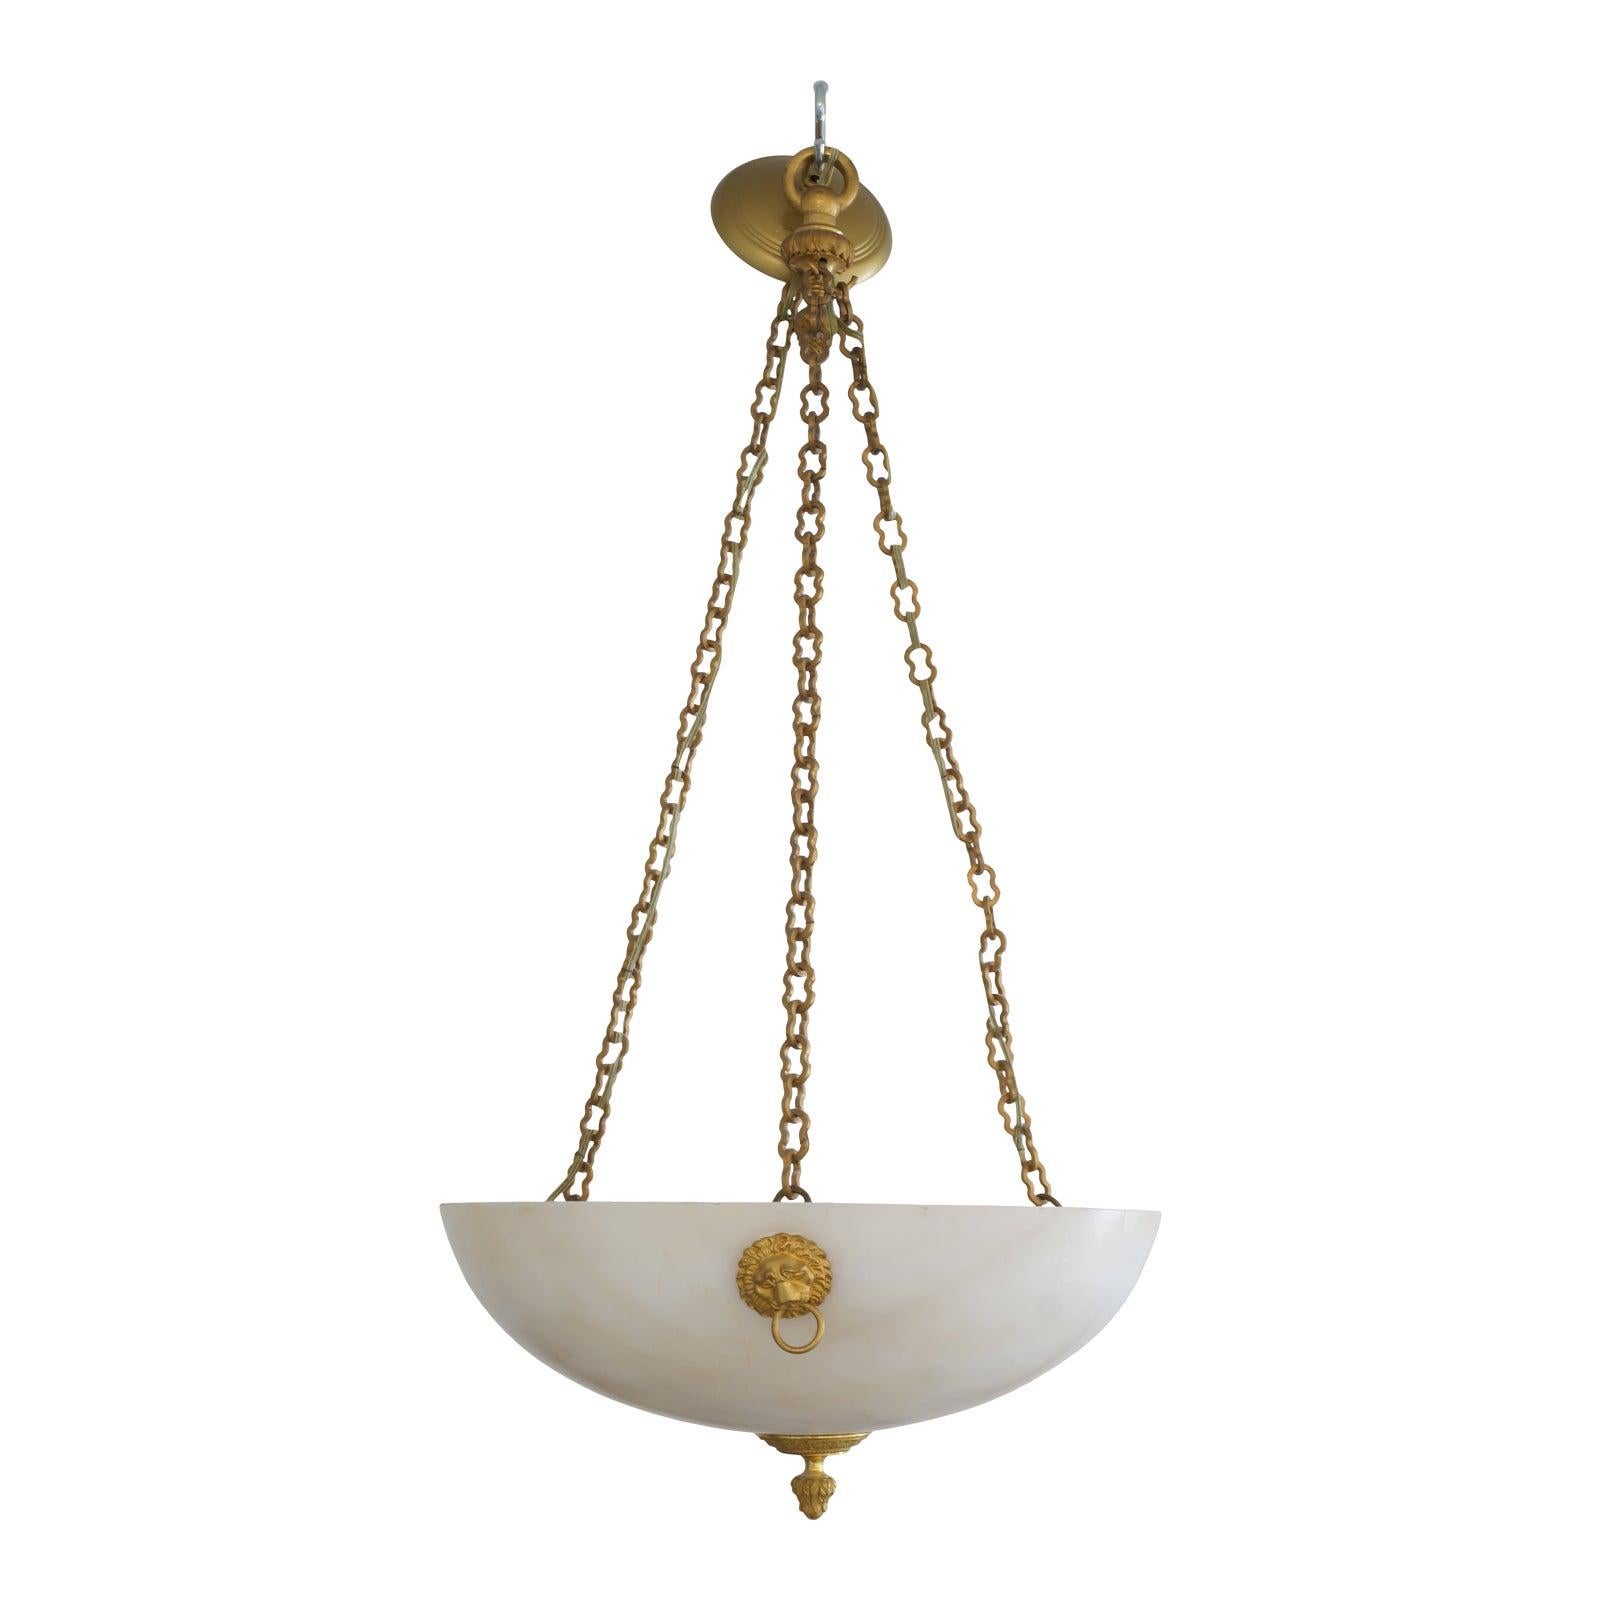 This stylish and chic Italian empire style chandelier dates to the 1920s-1930s and is fabricated in bronze dore and alabaster. 

Note: Requires three Edison based light bulbs.

Note: There is an inclusion on the outside of the alabaster rim (see